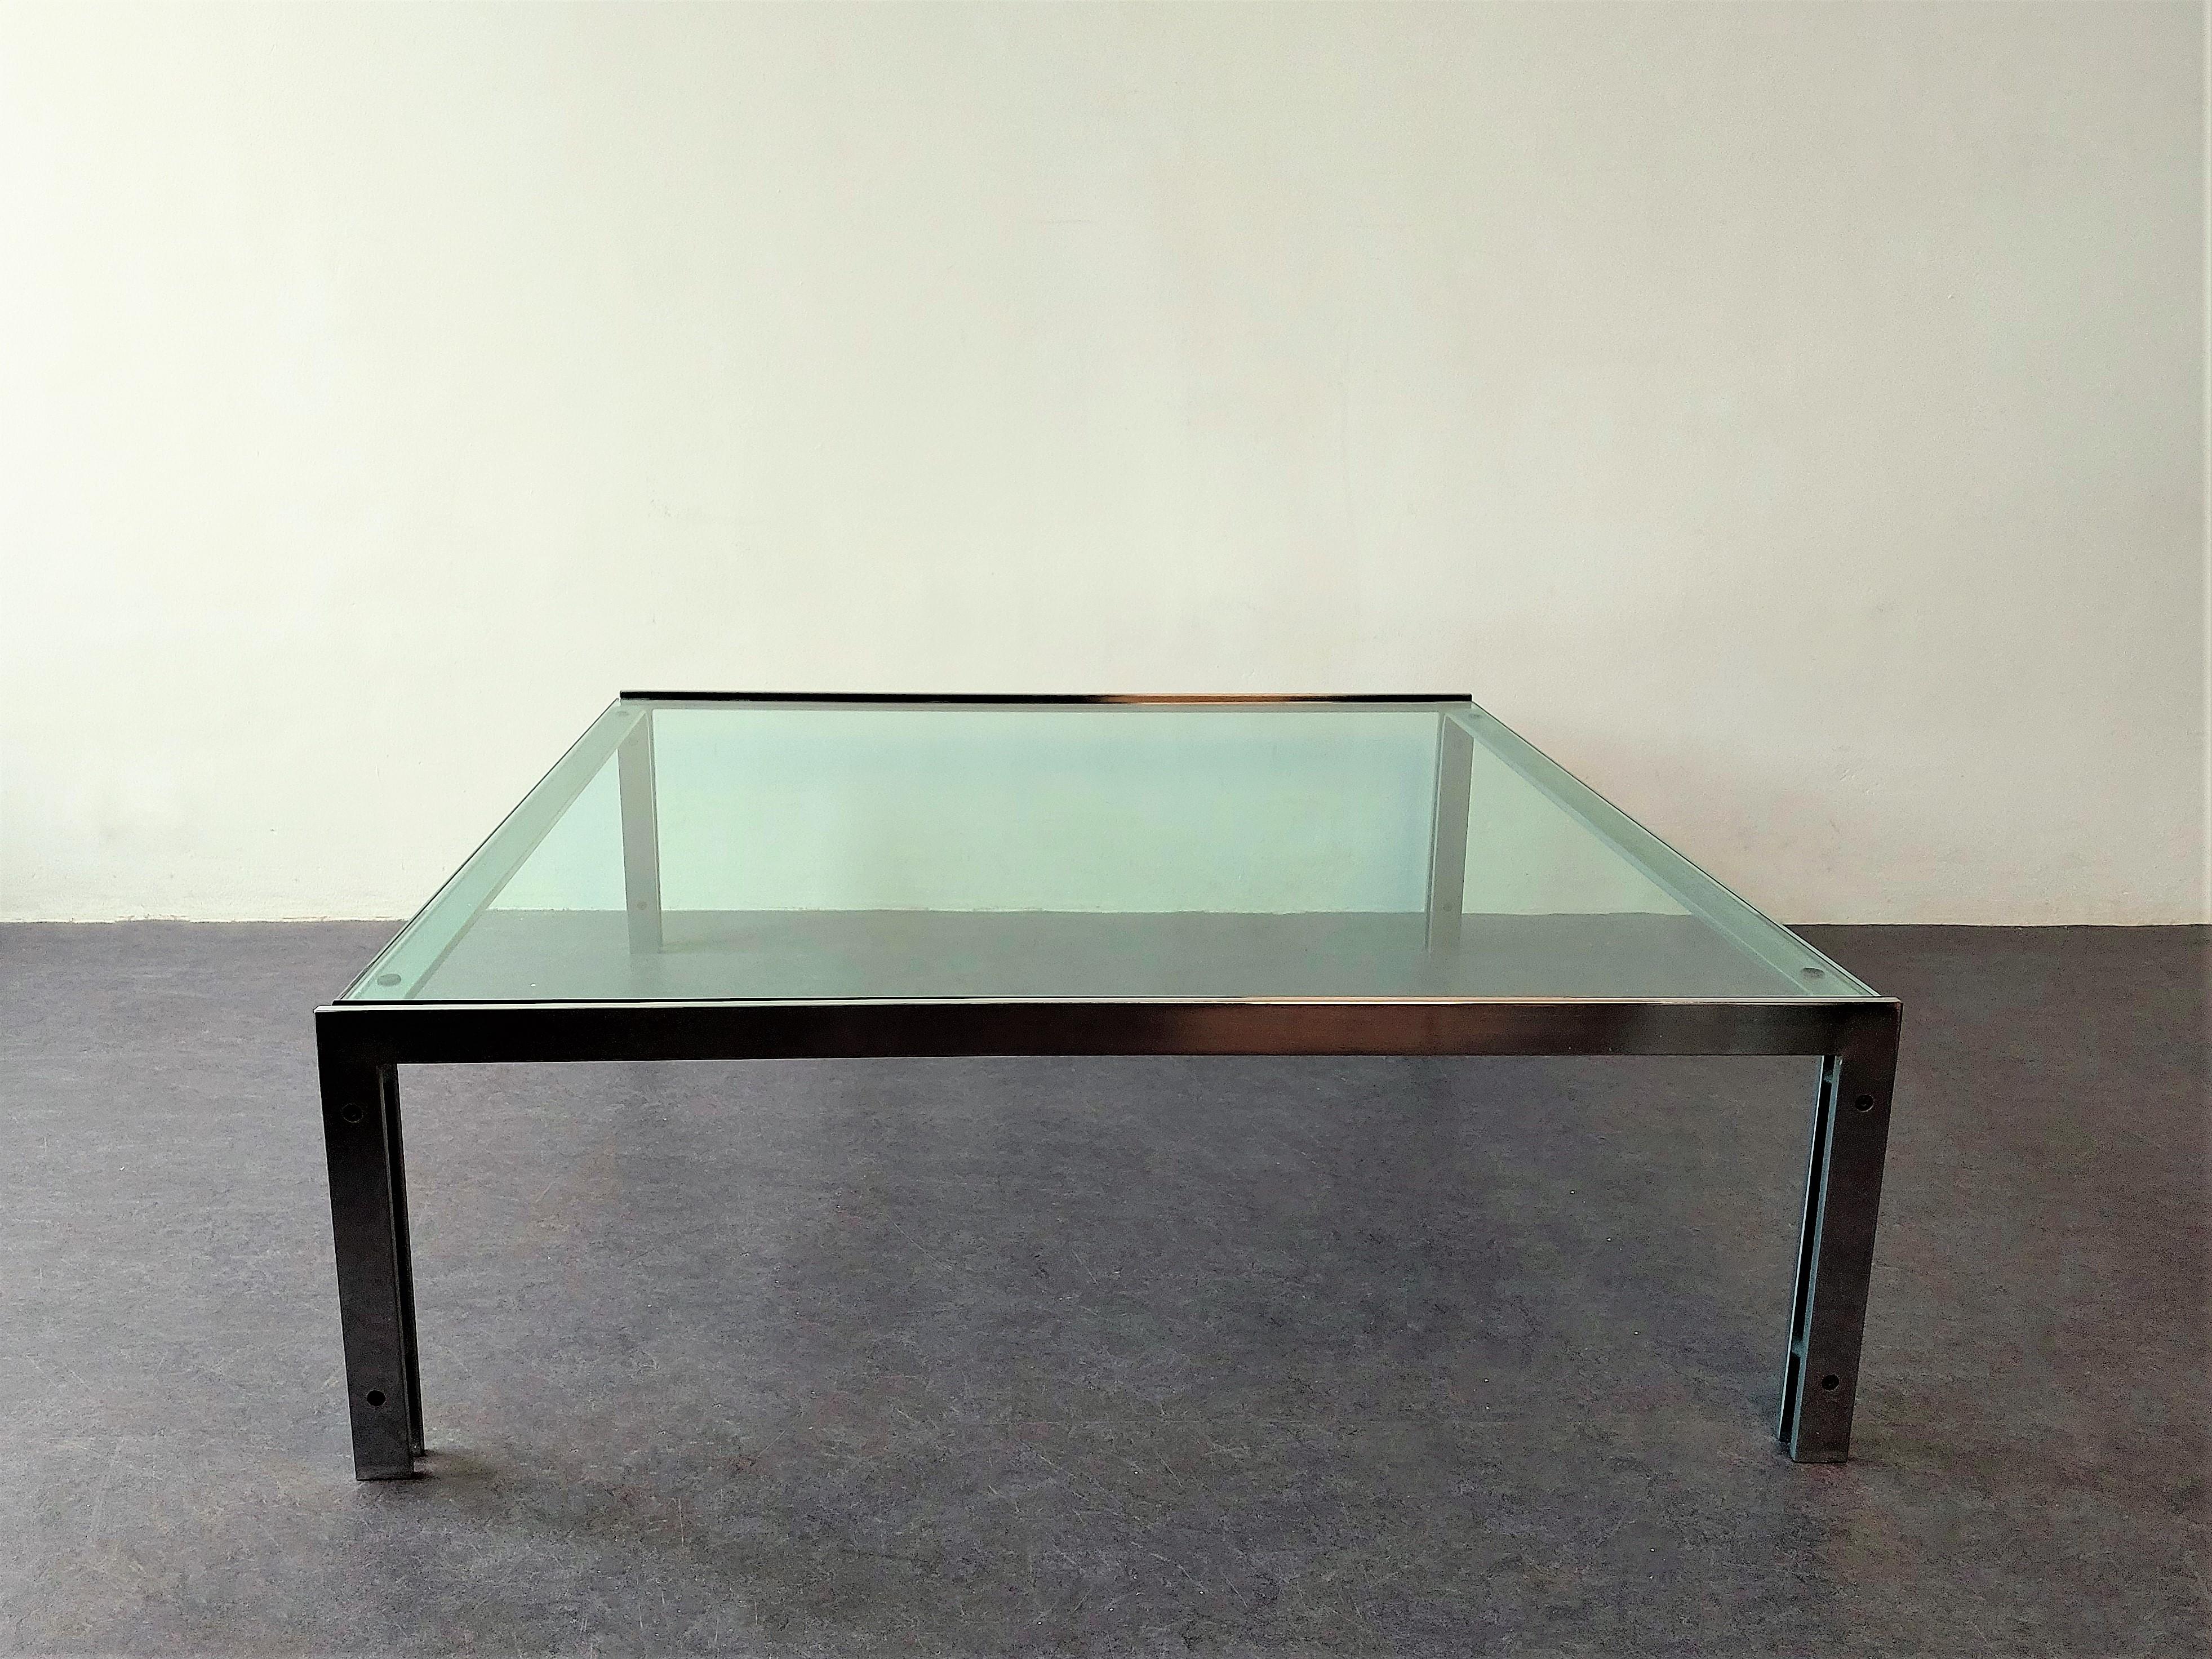 Mid-Century Modern Large Steel and Glass M1 Coffee Table by Hank Kwint for Metaform, 1980's For Sale